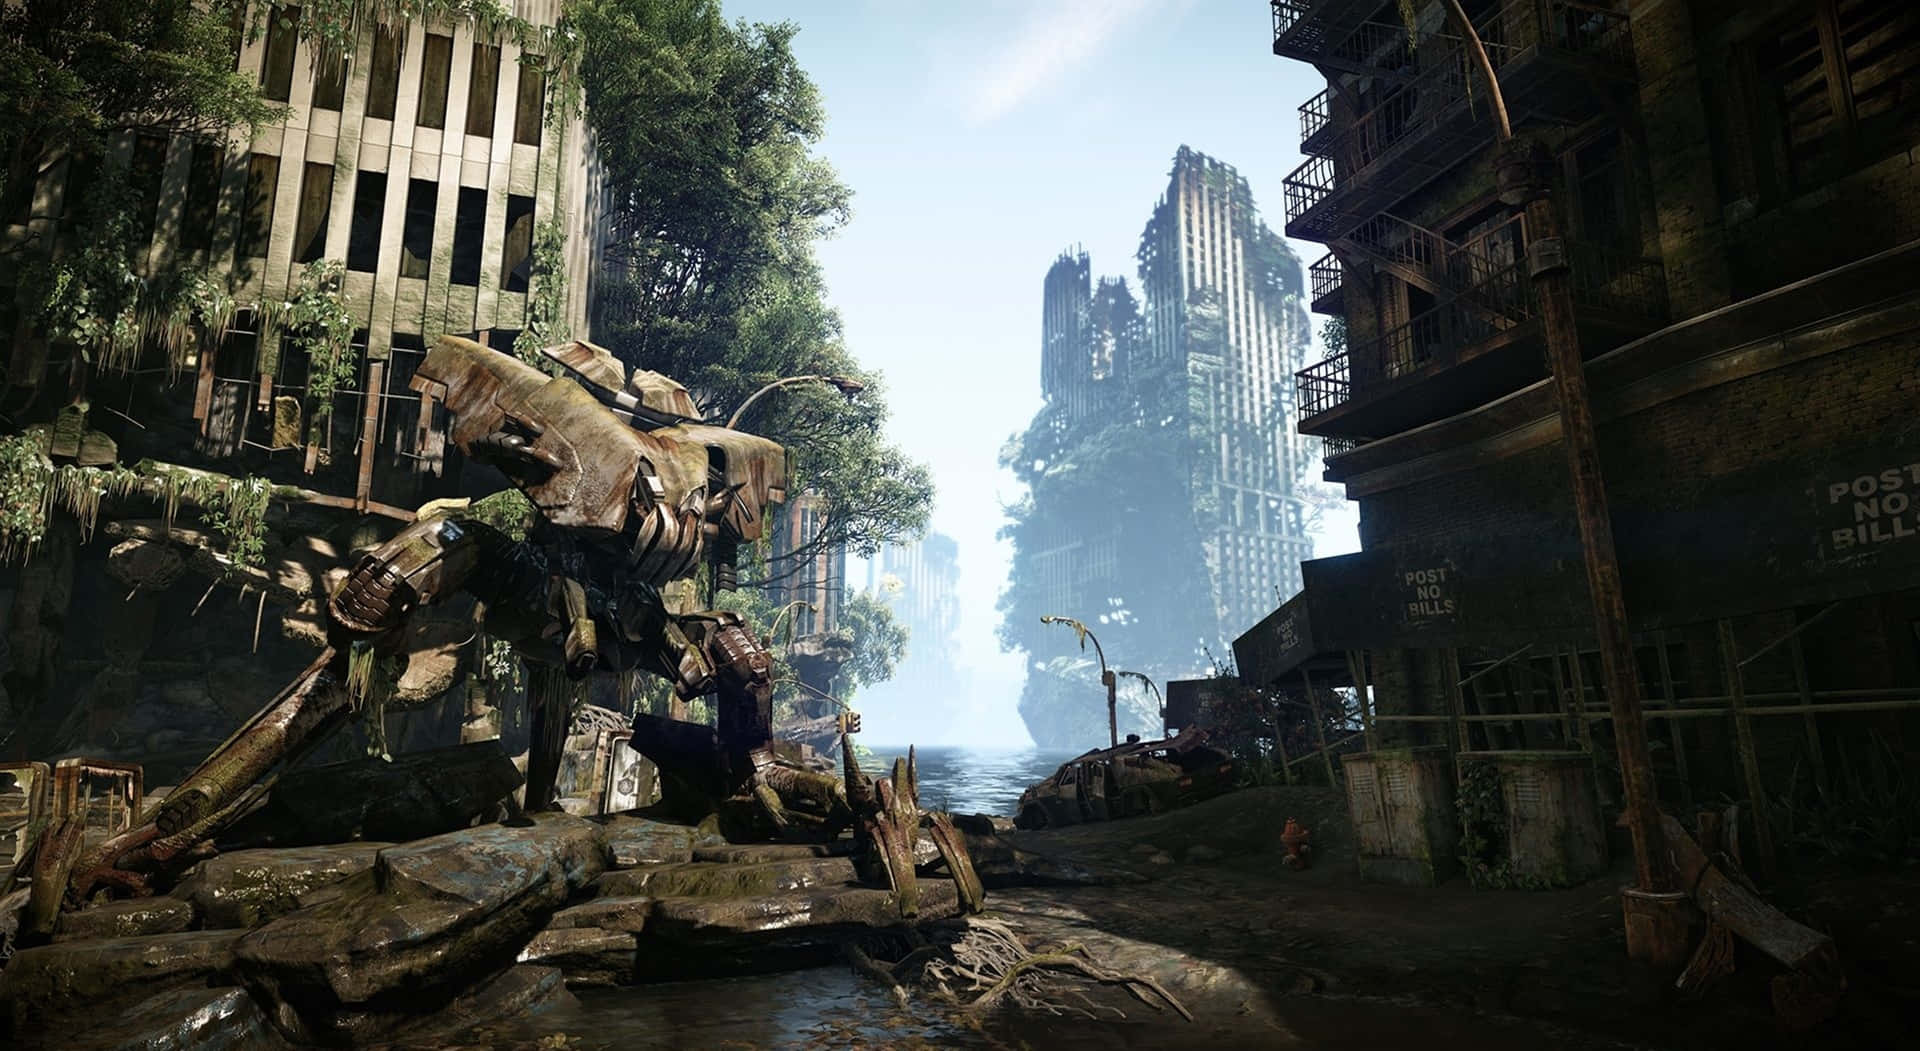 Blast Your Way Through A Ruined City In Crysis